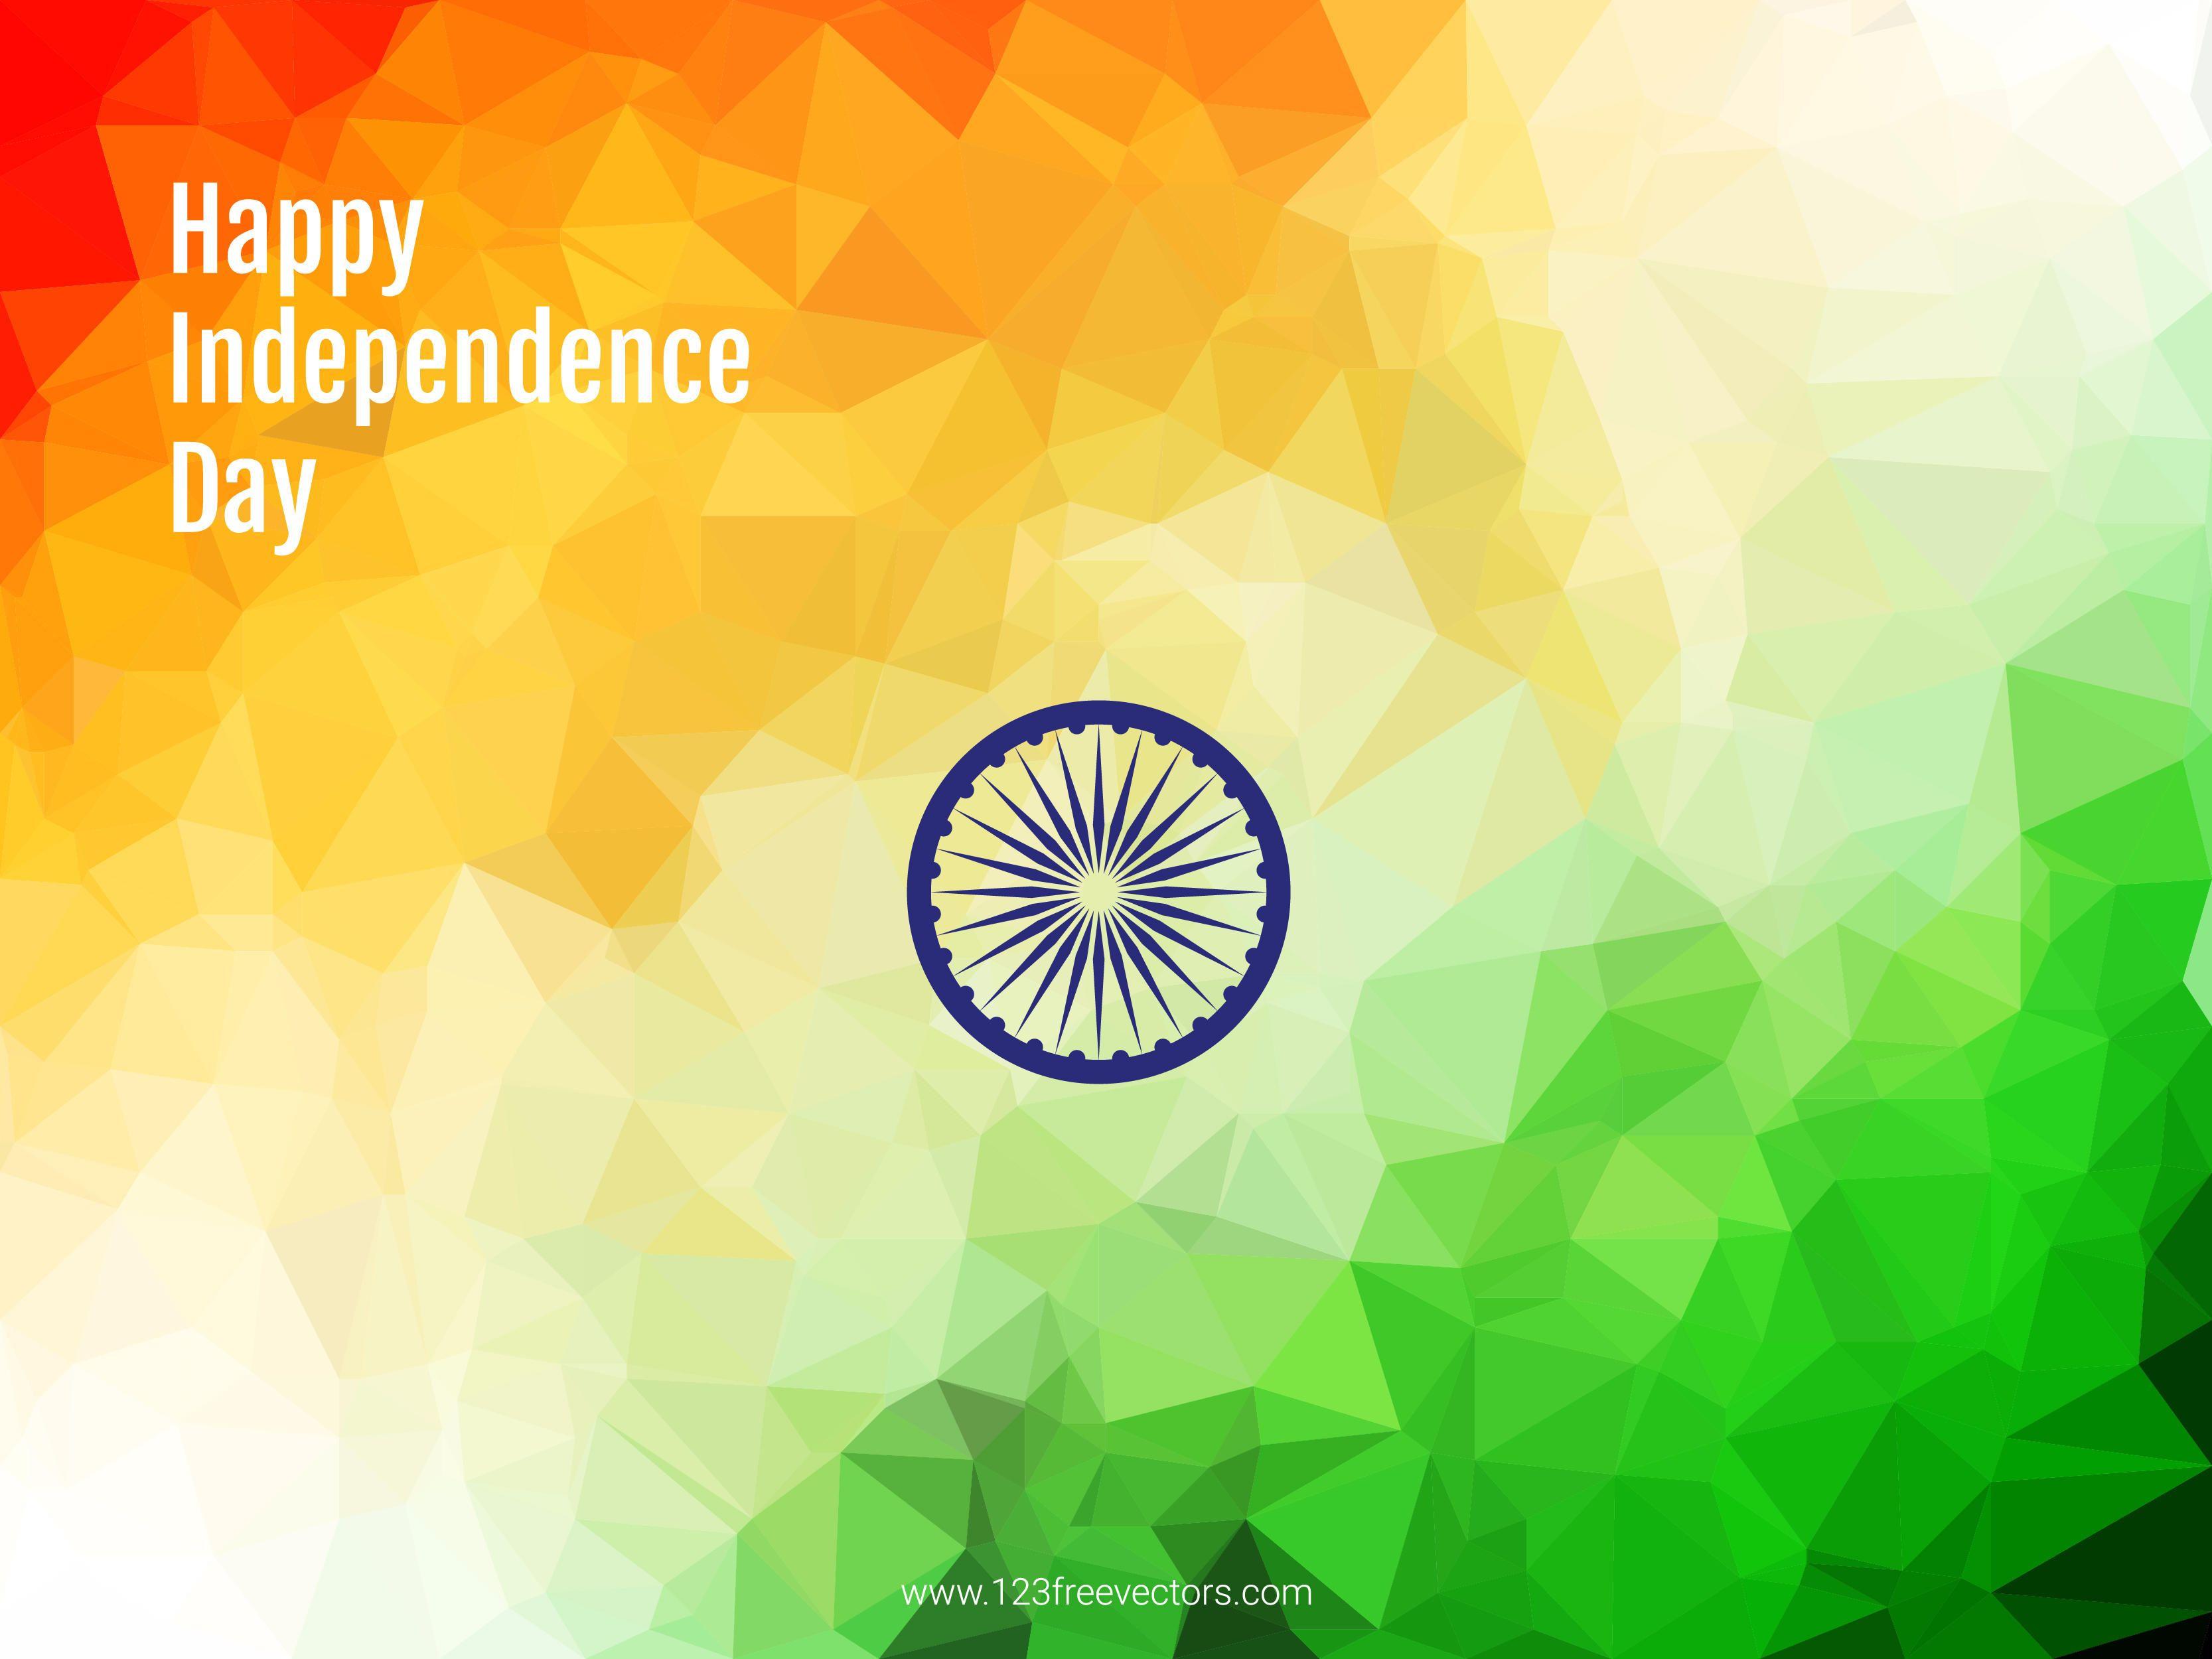 Indian Flag Theme Vector BackgroundFreevectors